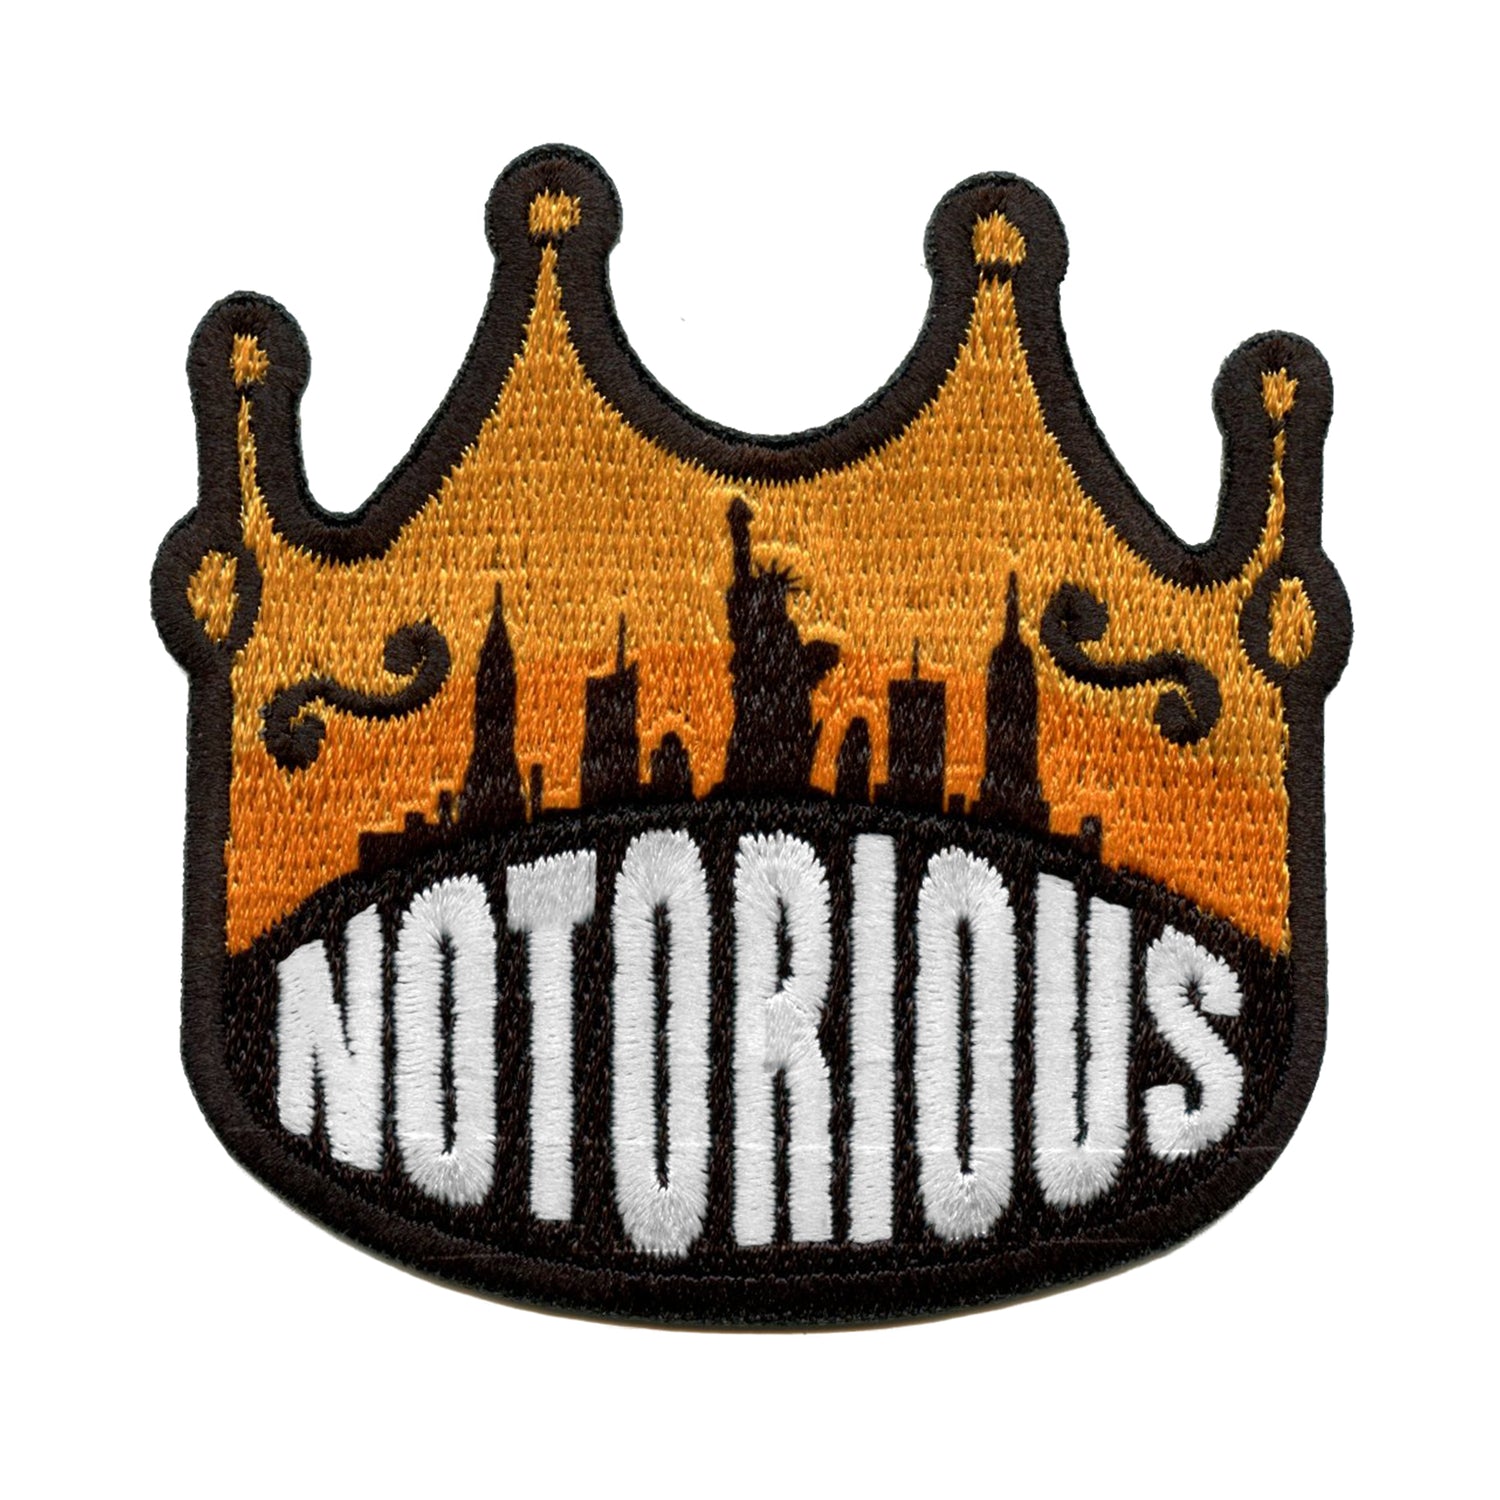 The Notorious B.I.G. Patches